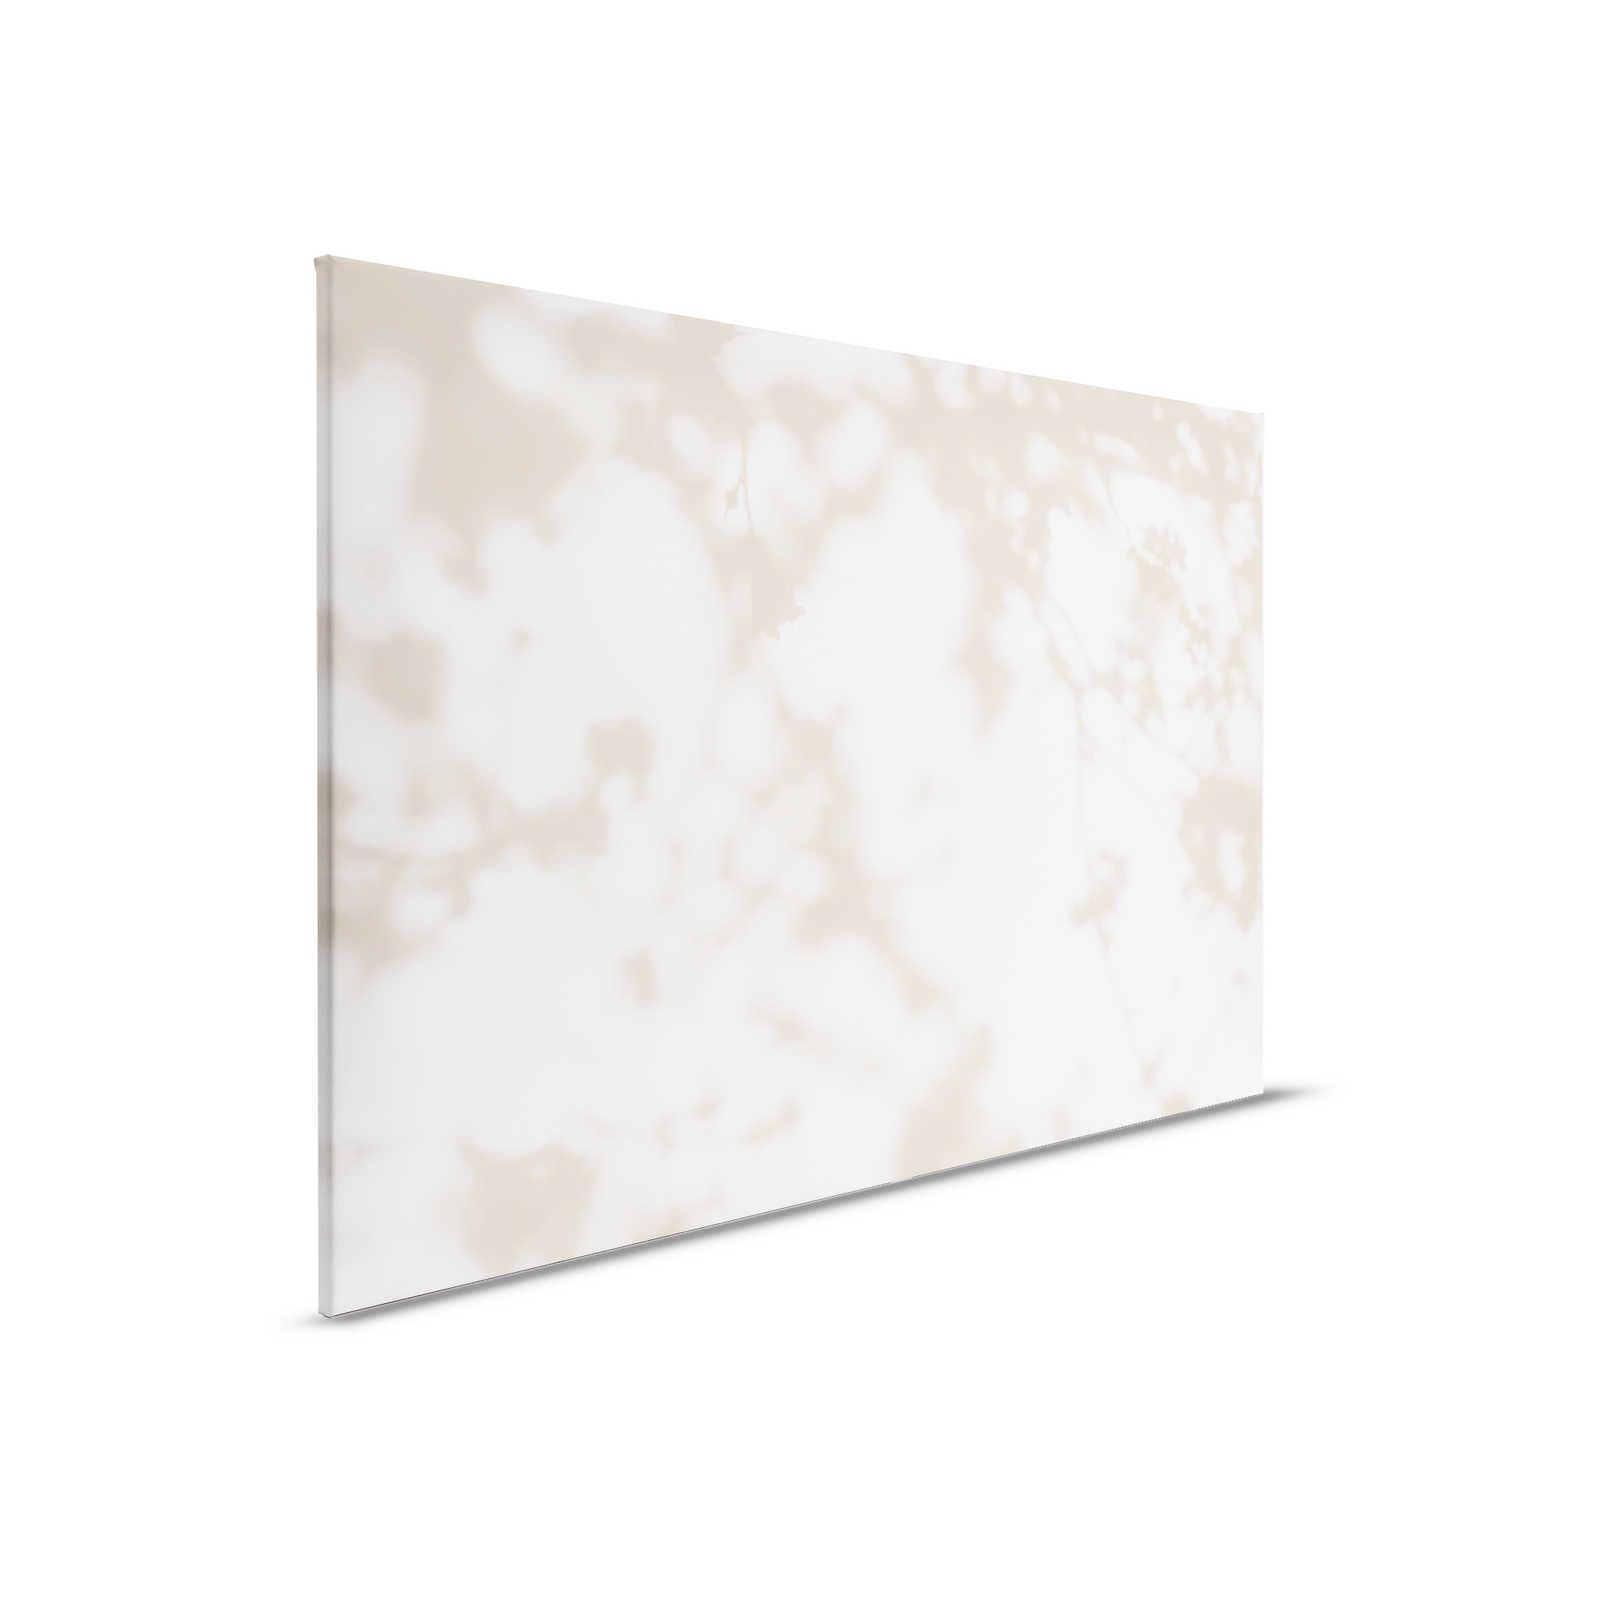 Light Room 3 - Canvas painting Nature Shadows in Beige & White - 0.90 m x 0.60 m
